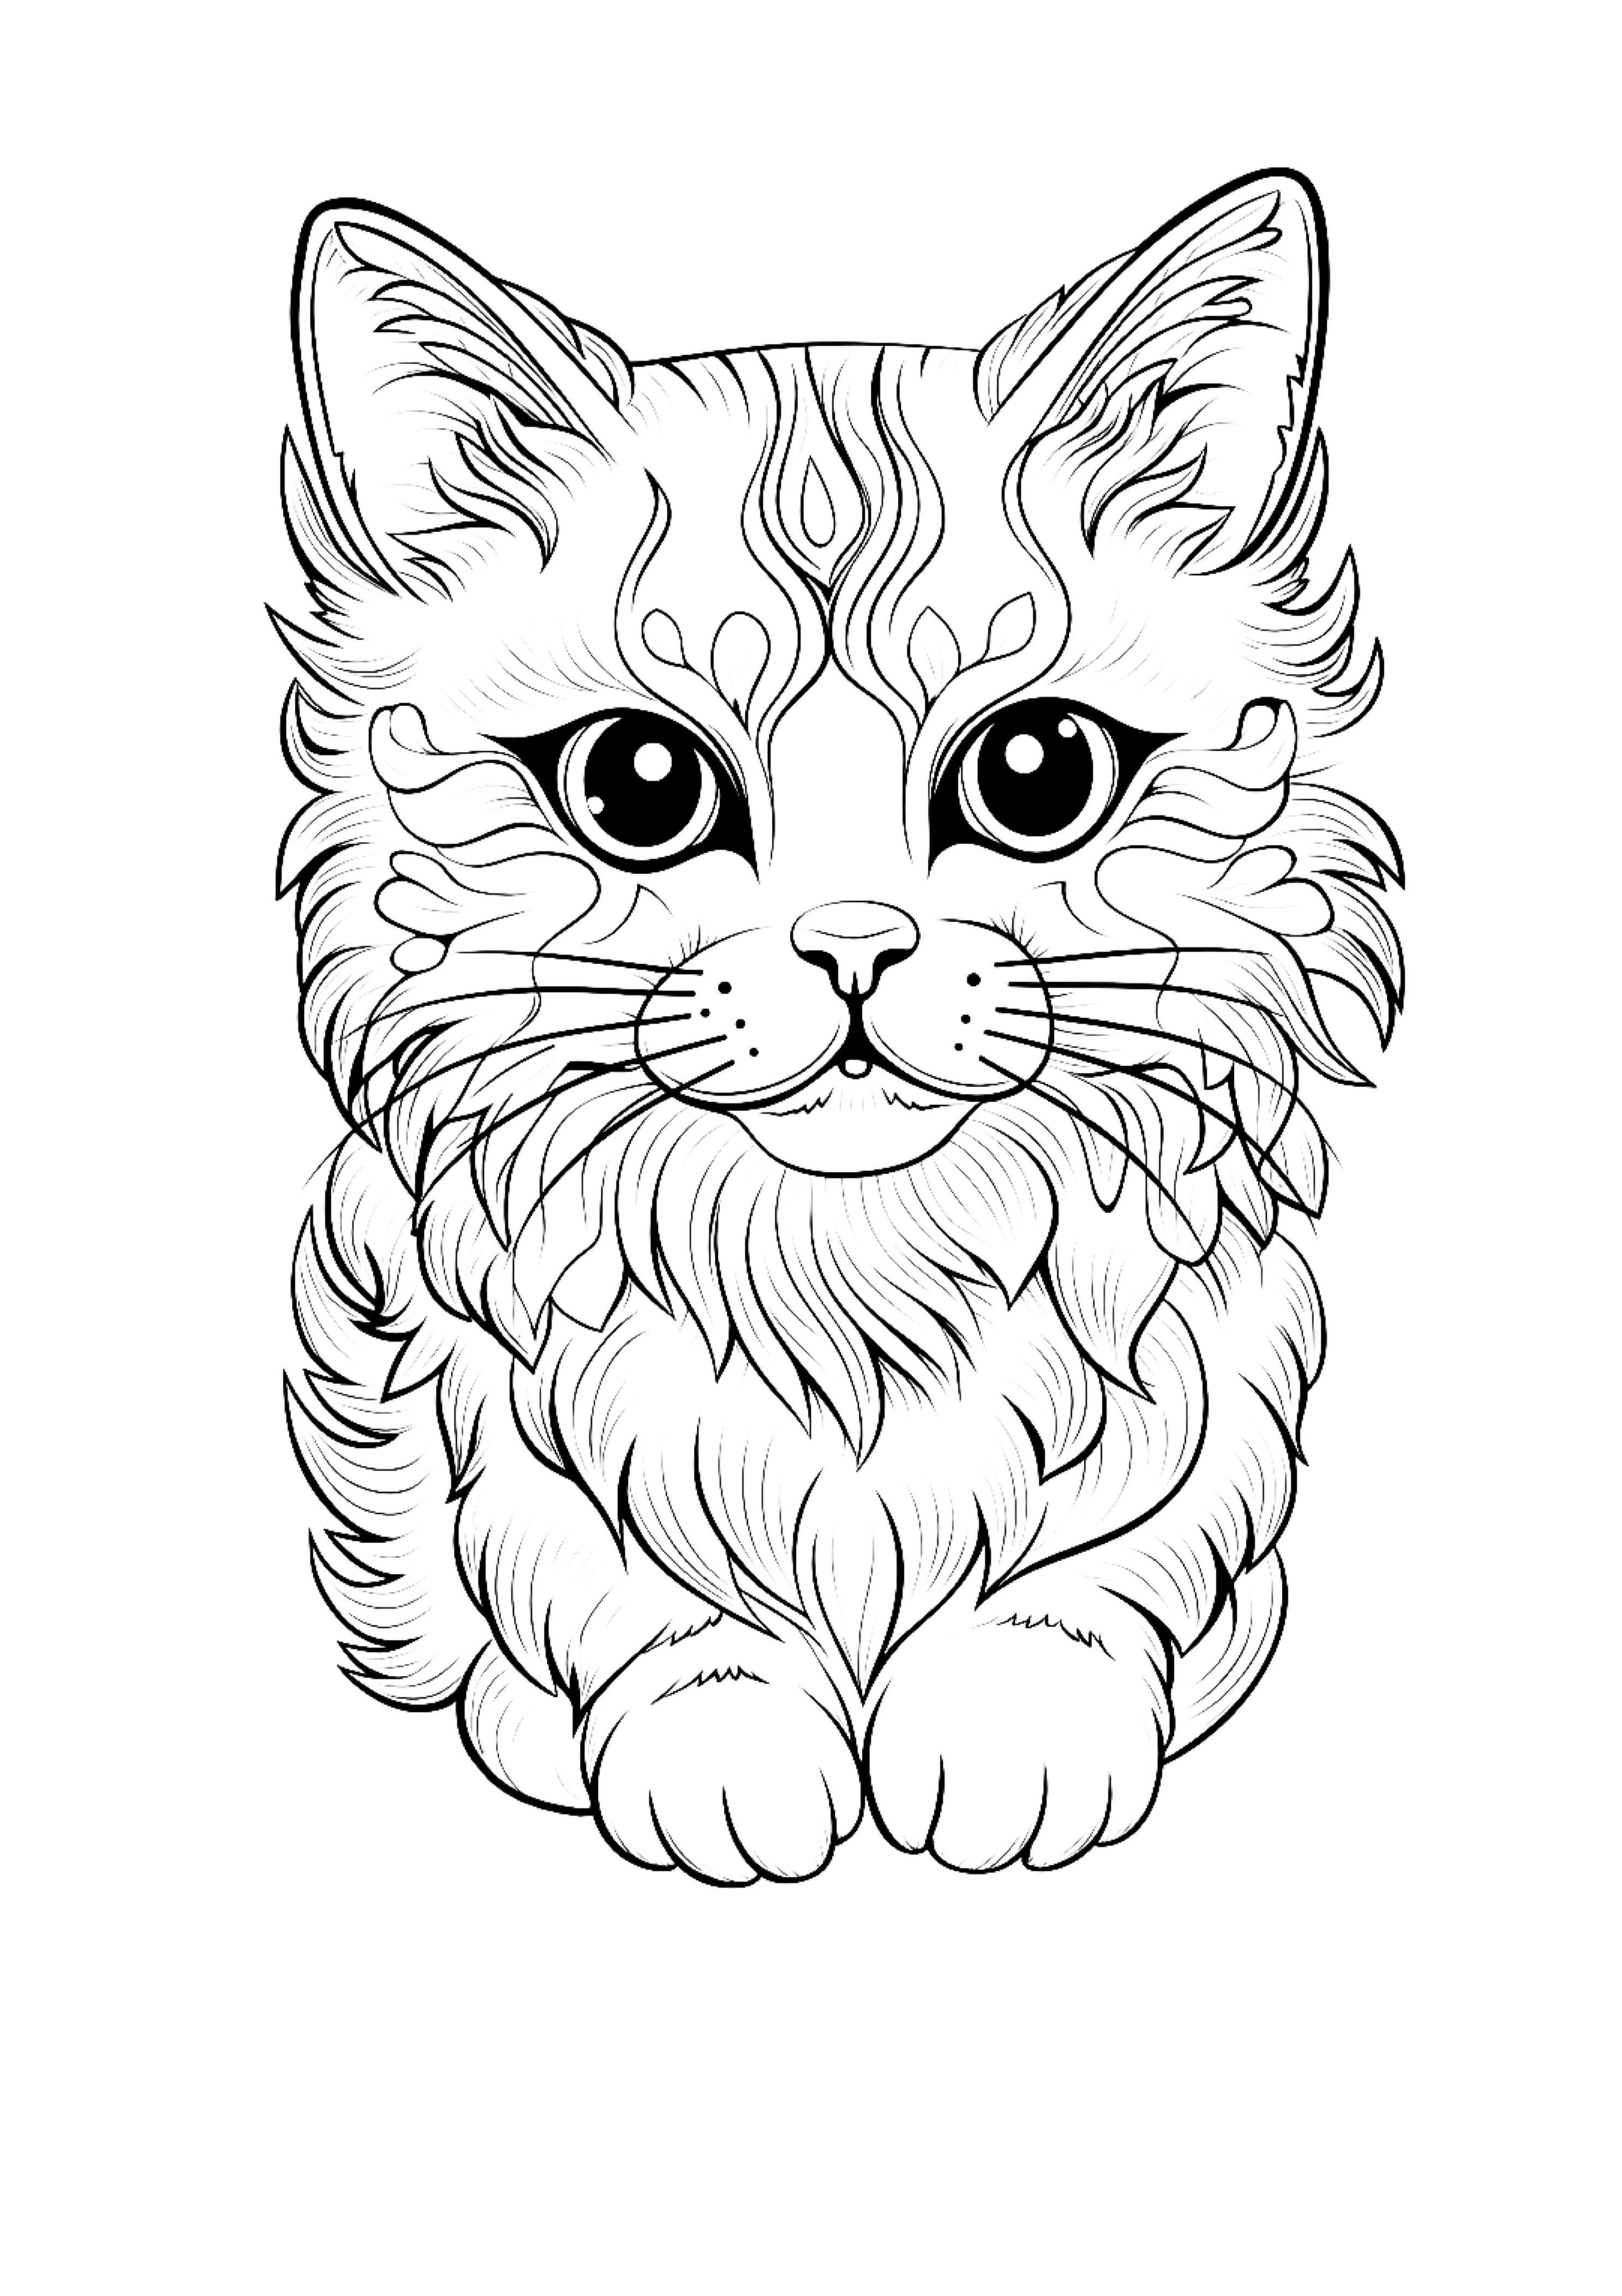 cartoon Kitten Coloring Pages for Kids.jpg